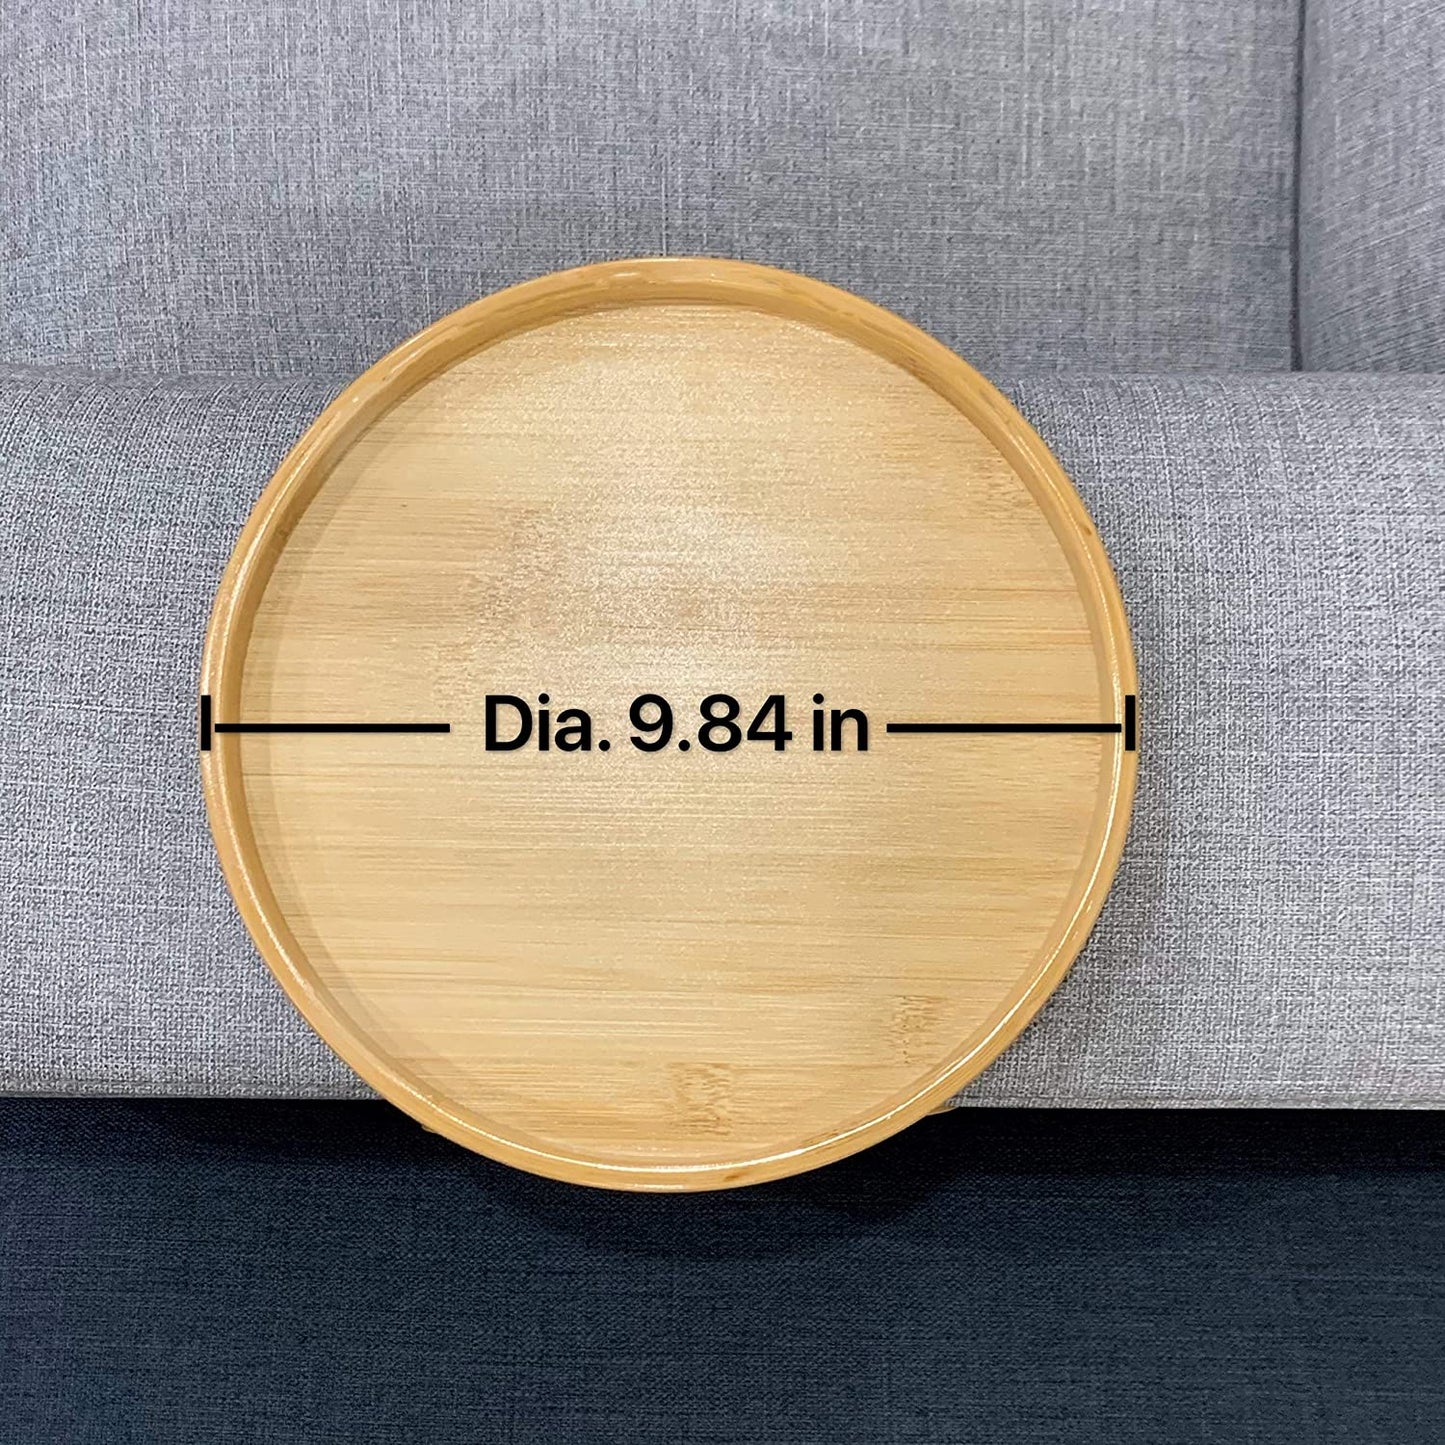 Wooden Round Sofa Armrest Clip-On Tray